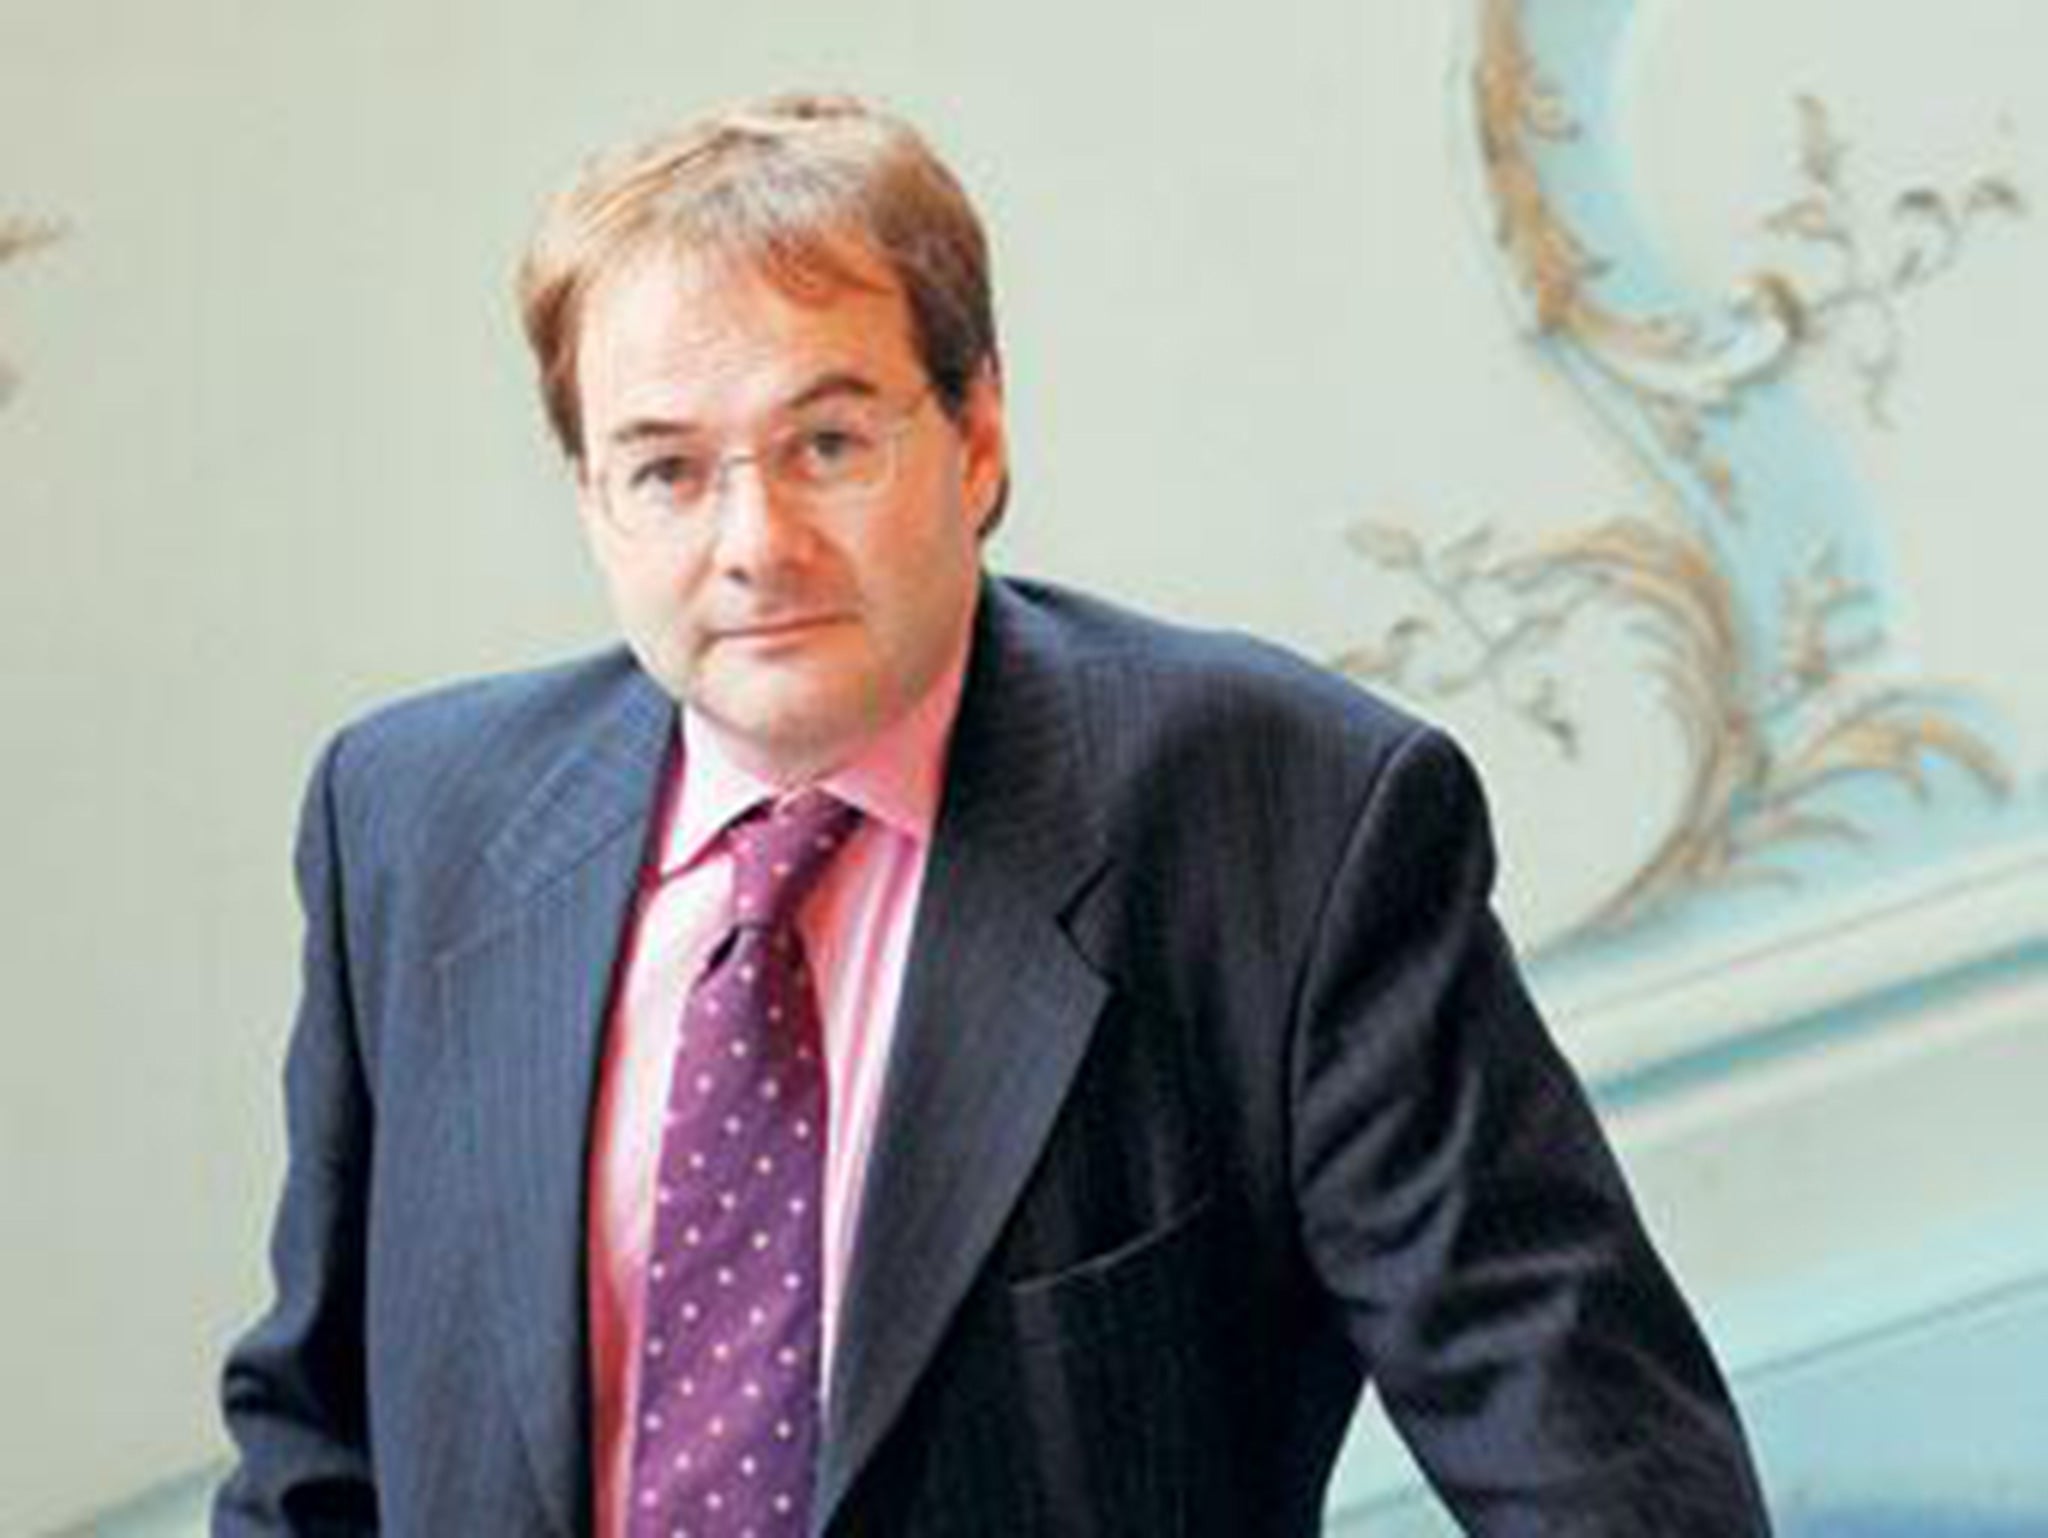 Daily Mail journalist Quentin Letts was presenting the show that caused the controversy